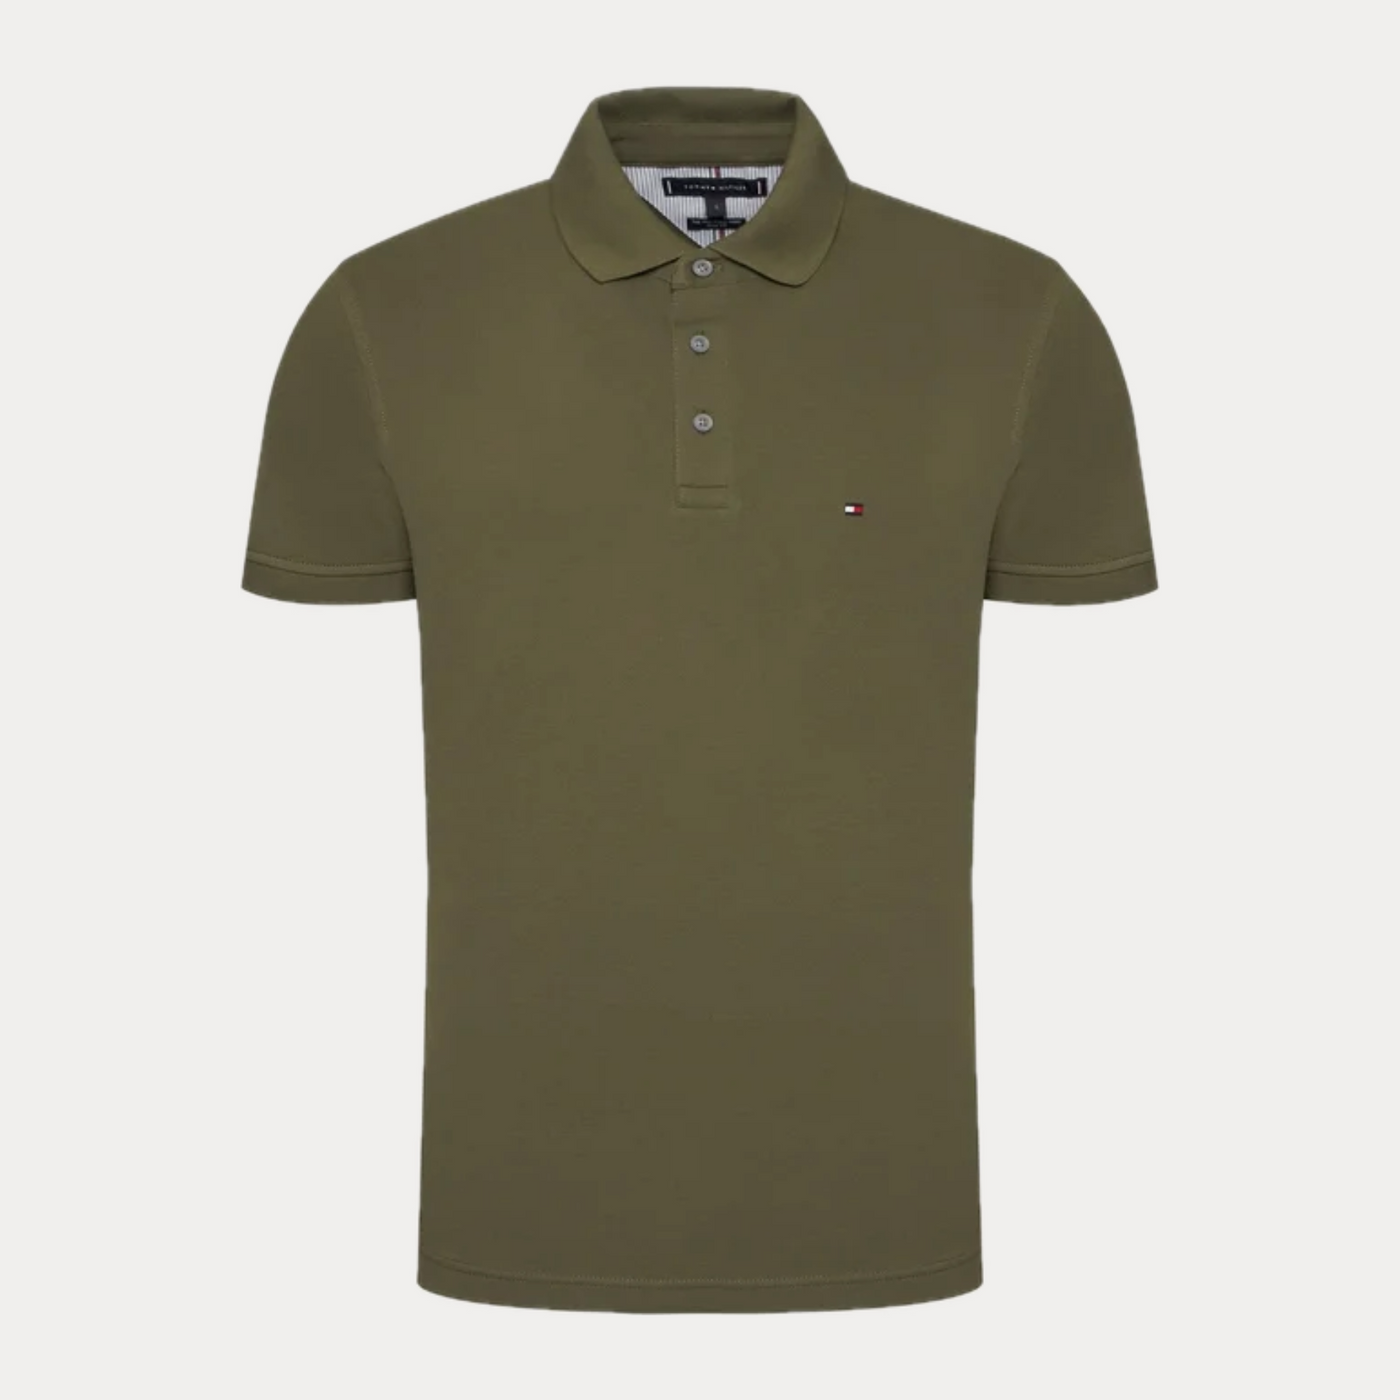 TOMMY HILFIGER - POLO SLIM FIT